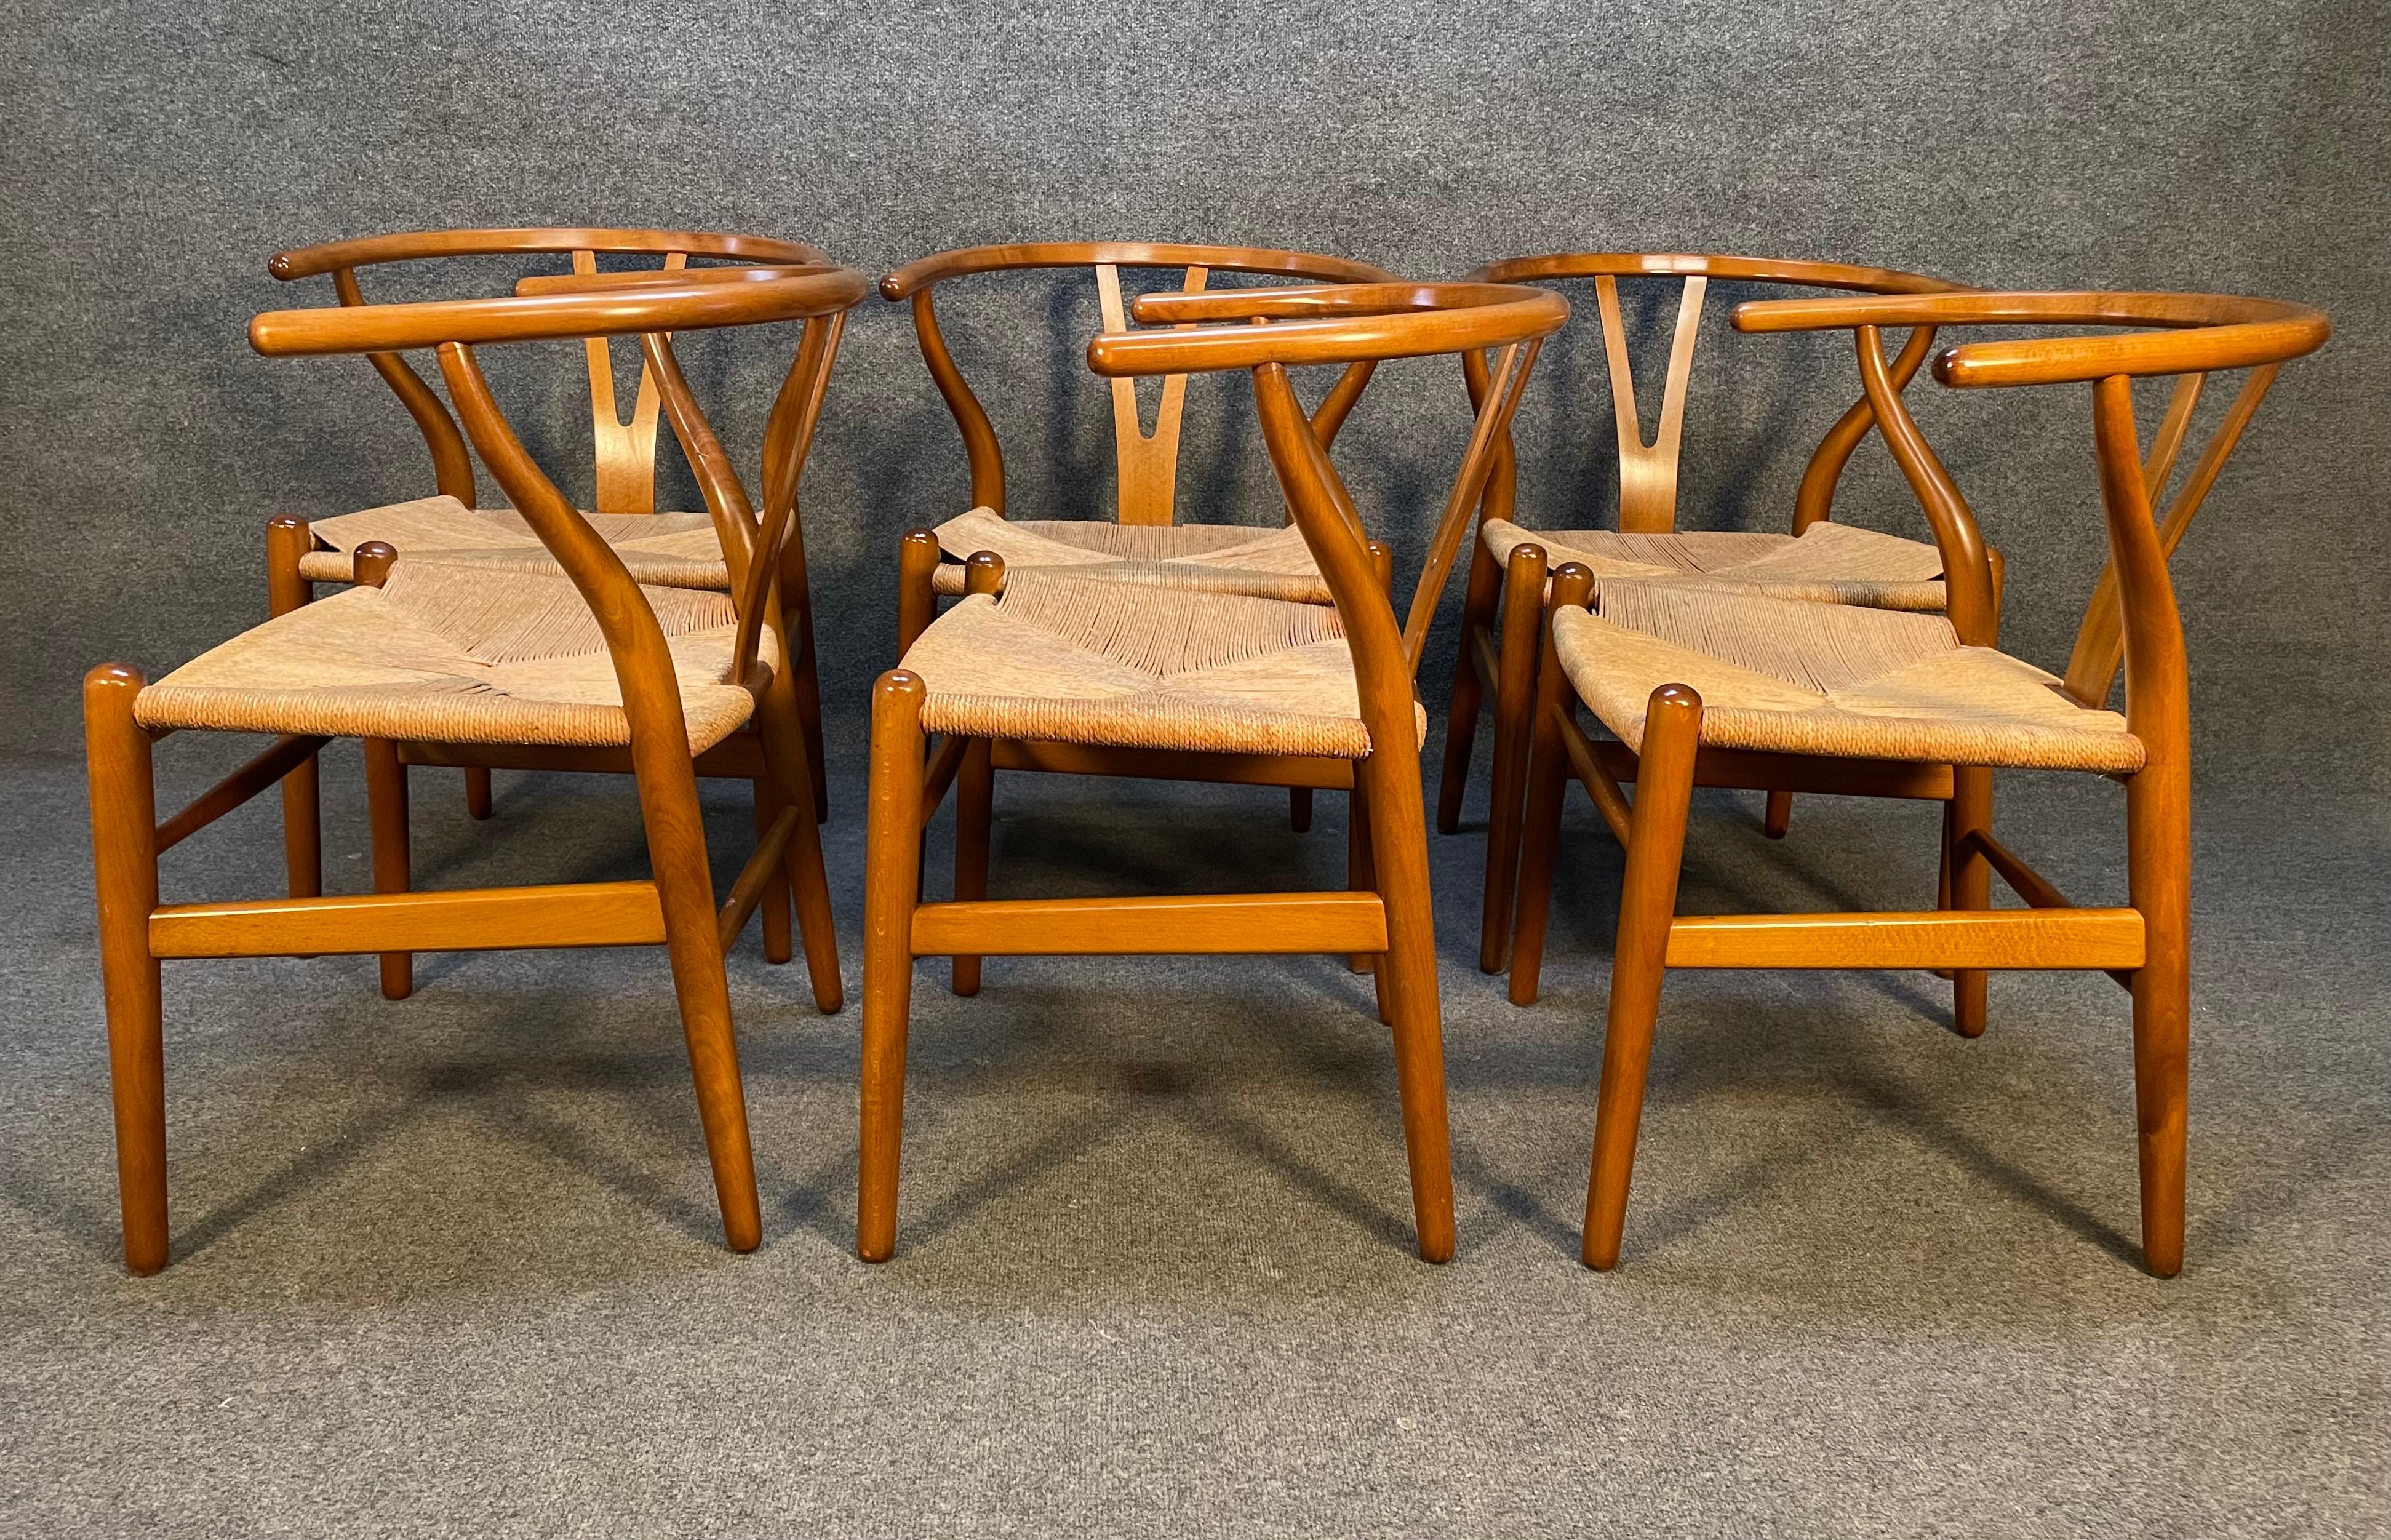 Here is a beautiful set of 6 scandinavian modern dining chairs in beech wood designed by Hans Wegner in Denmark in the 1950's and manufactured by Carl Hansen in the early 2010's.
This exquisite set features a solid and sculptural beech frame which